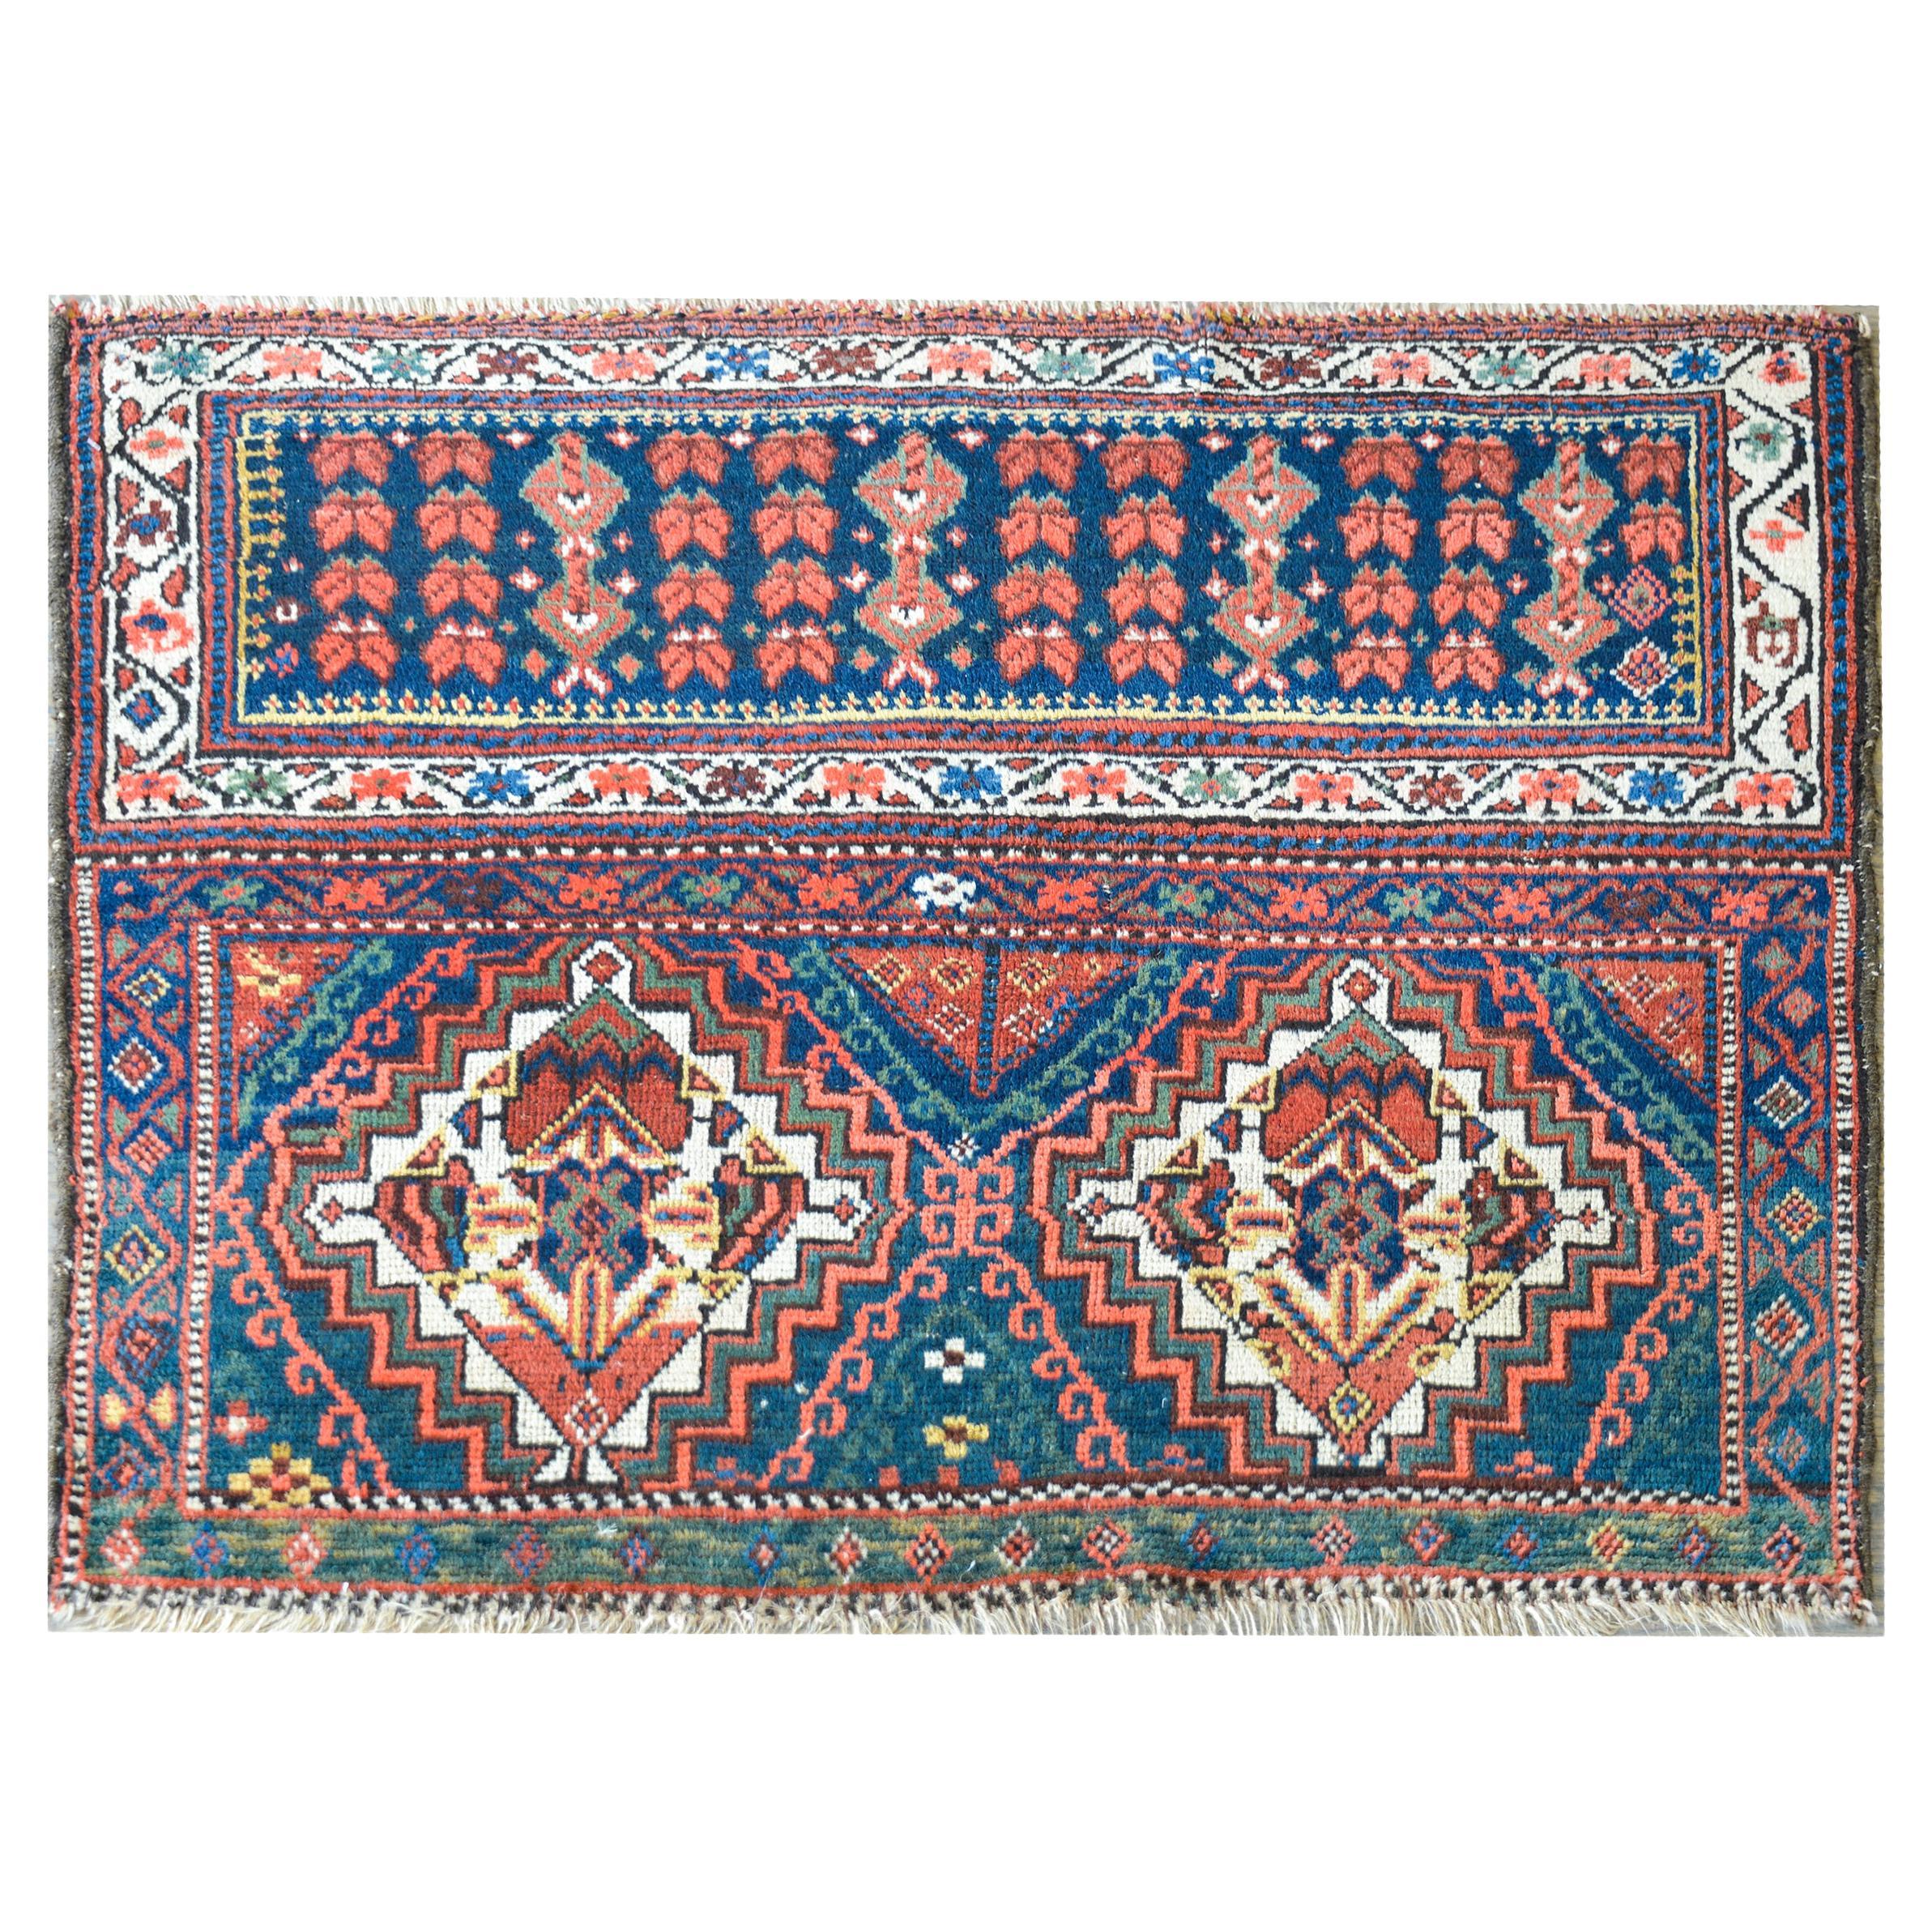 Early 20th Century Malayer Bag Face Rug